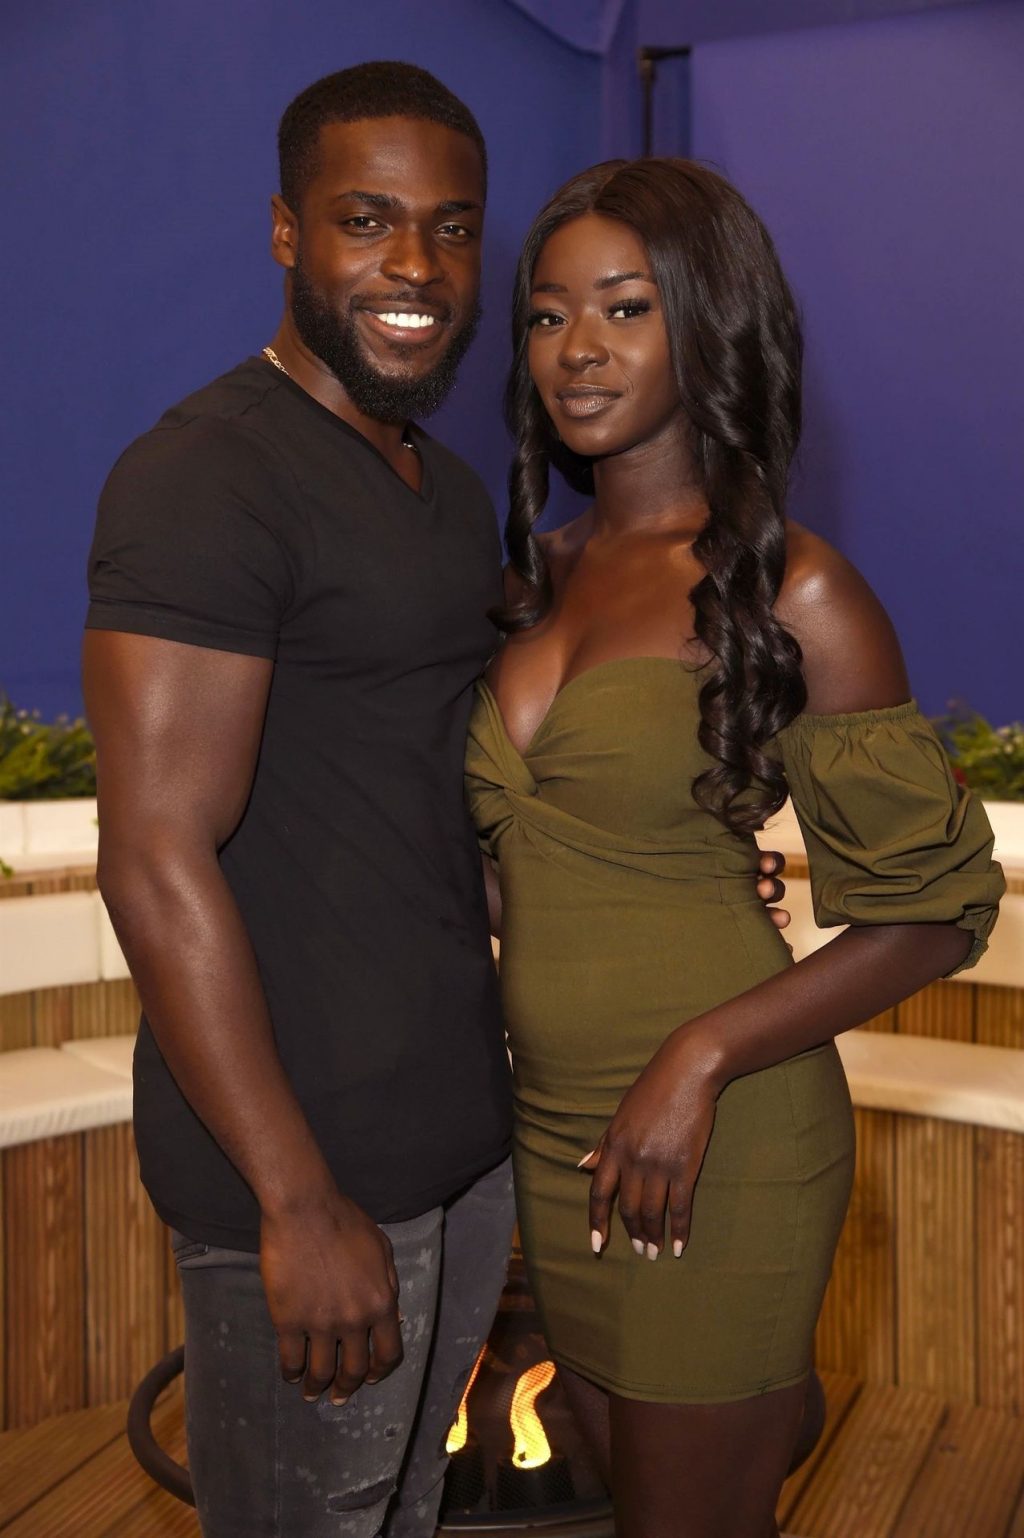 Mike Boateng and Priscilla Anyabu Pictured in Manchester (21 Photos)